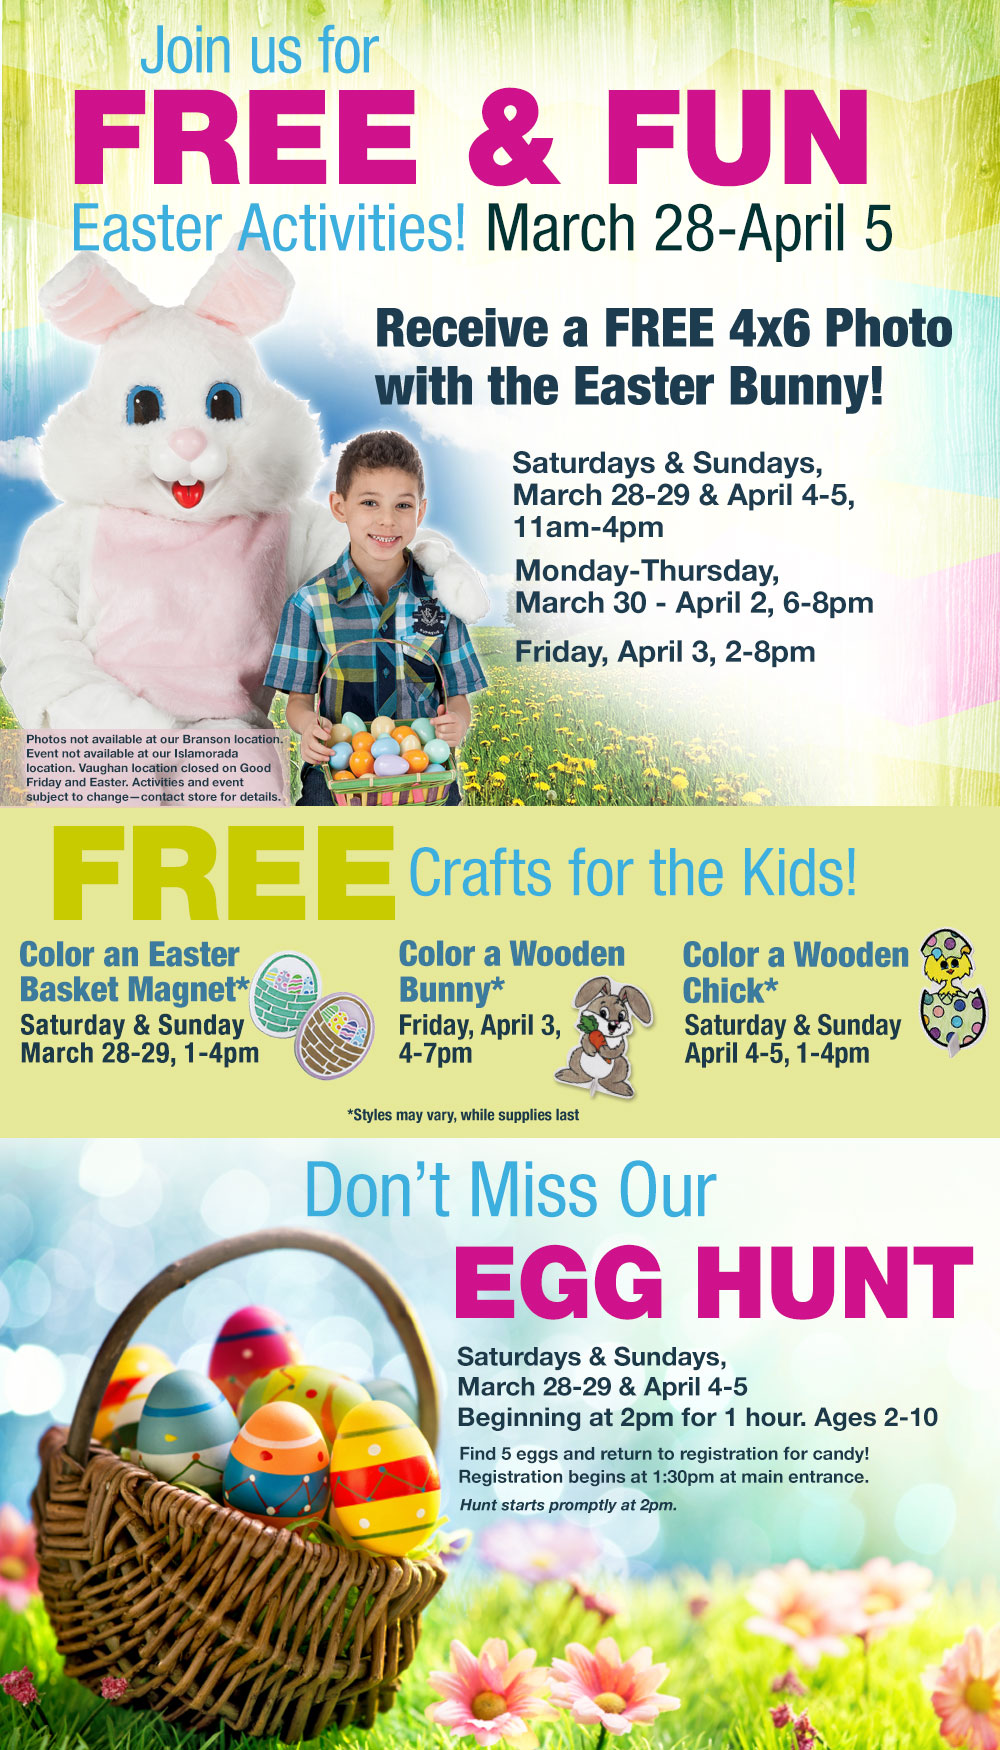 Free Weekend Family Fun and Activities RoundUp!